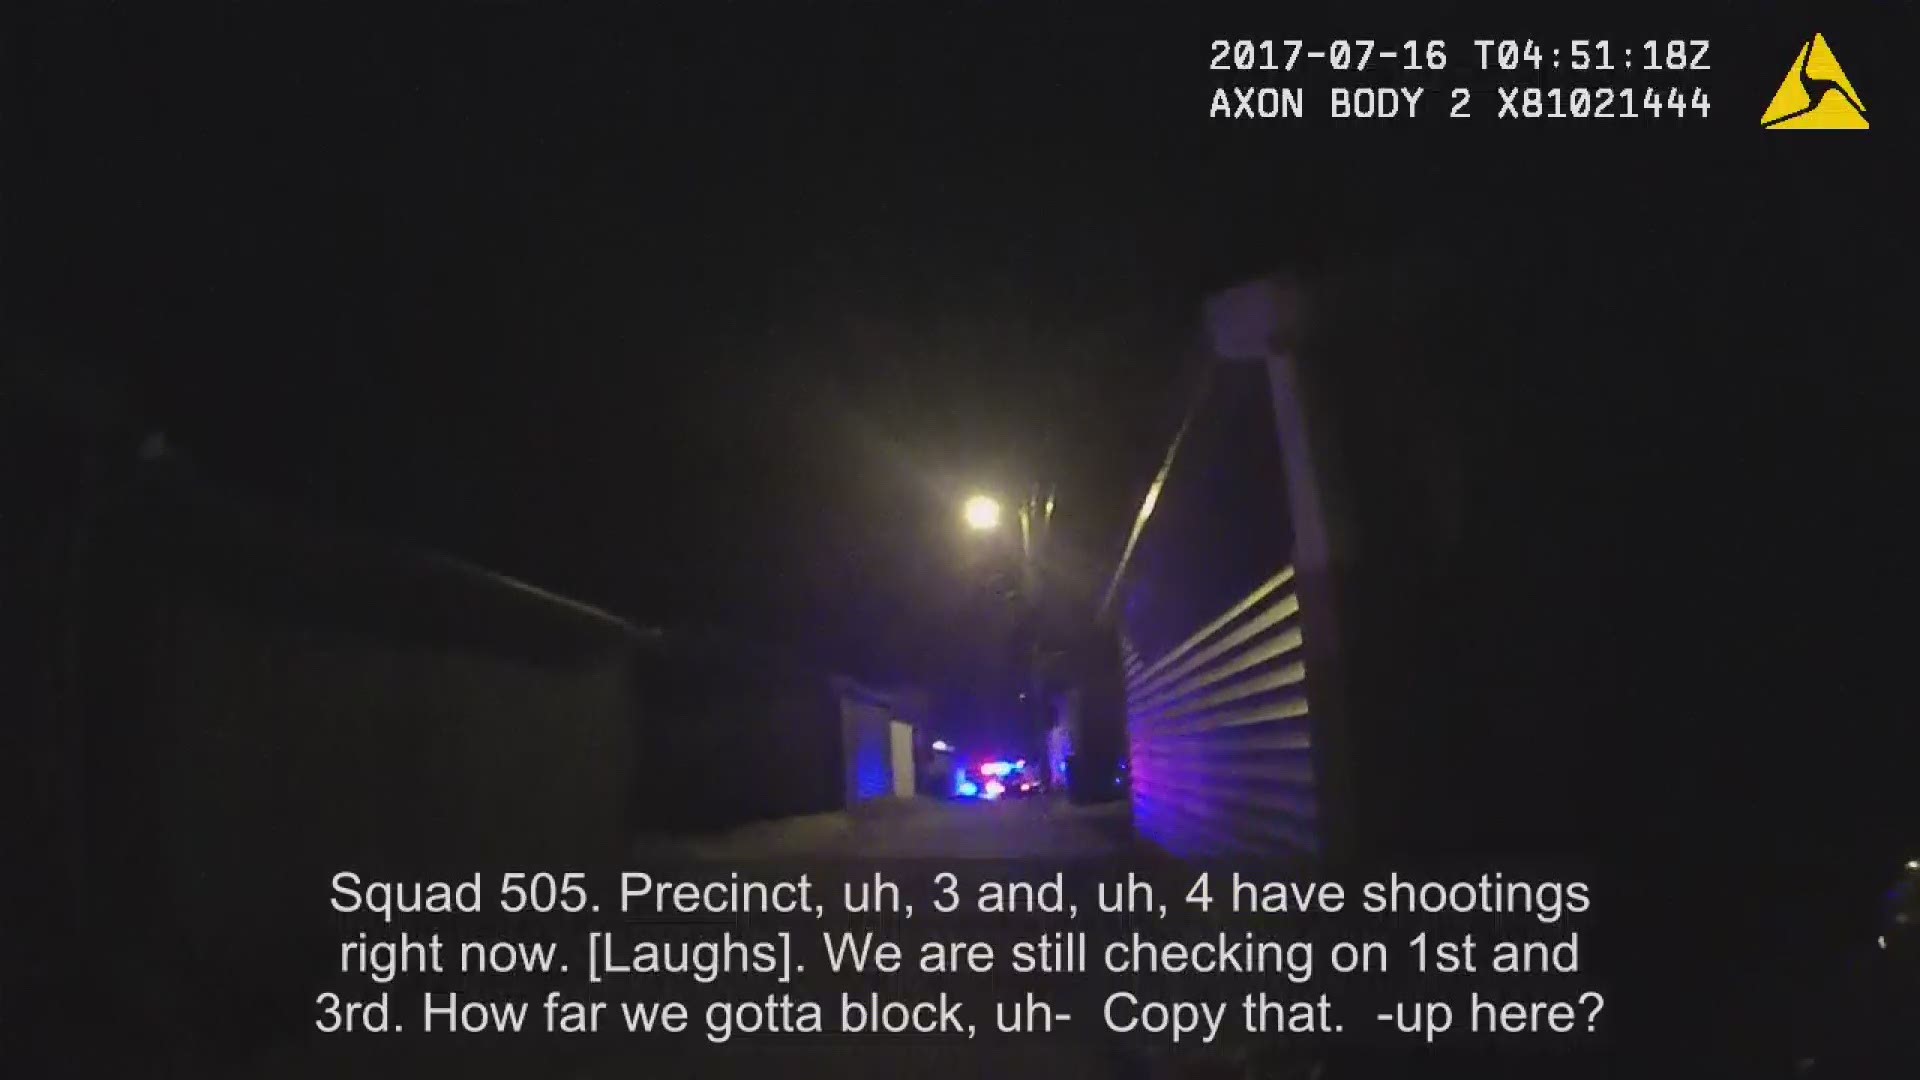 The body camera video of Officer Robert Lewis, from the scene of the fatal shooting of Justine Ruszczyk Damond.